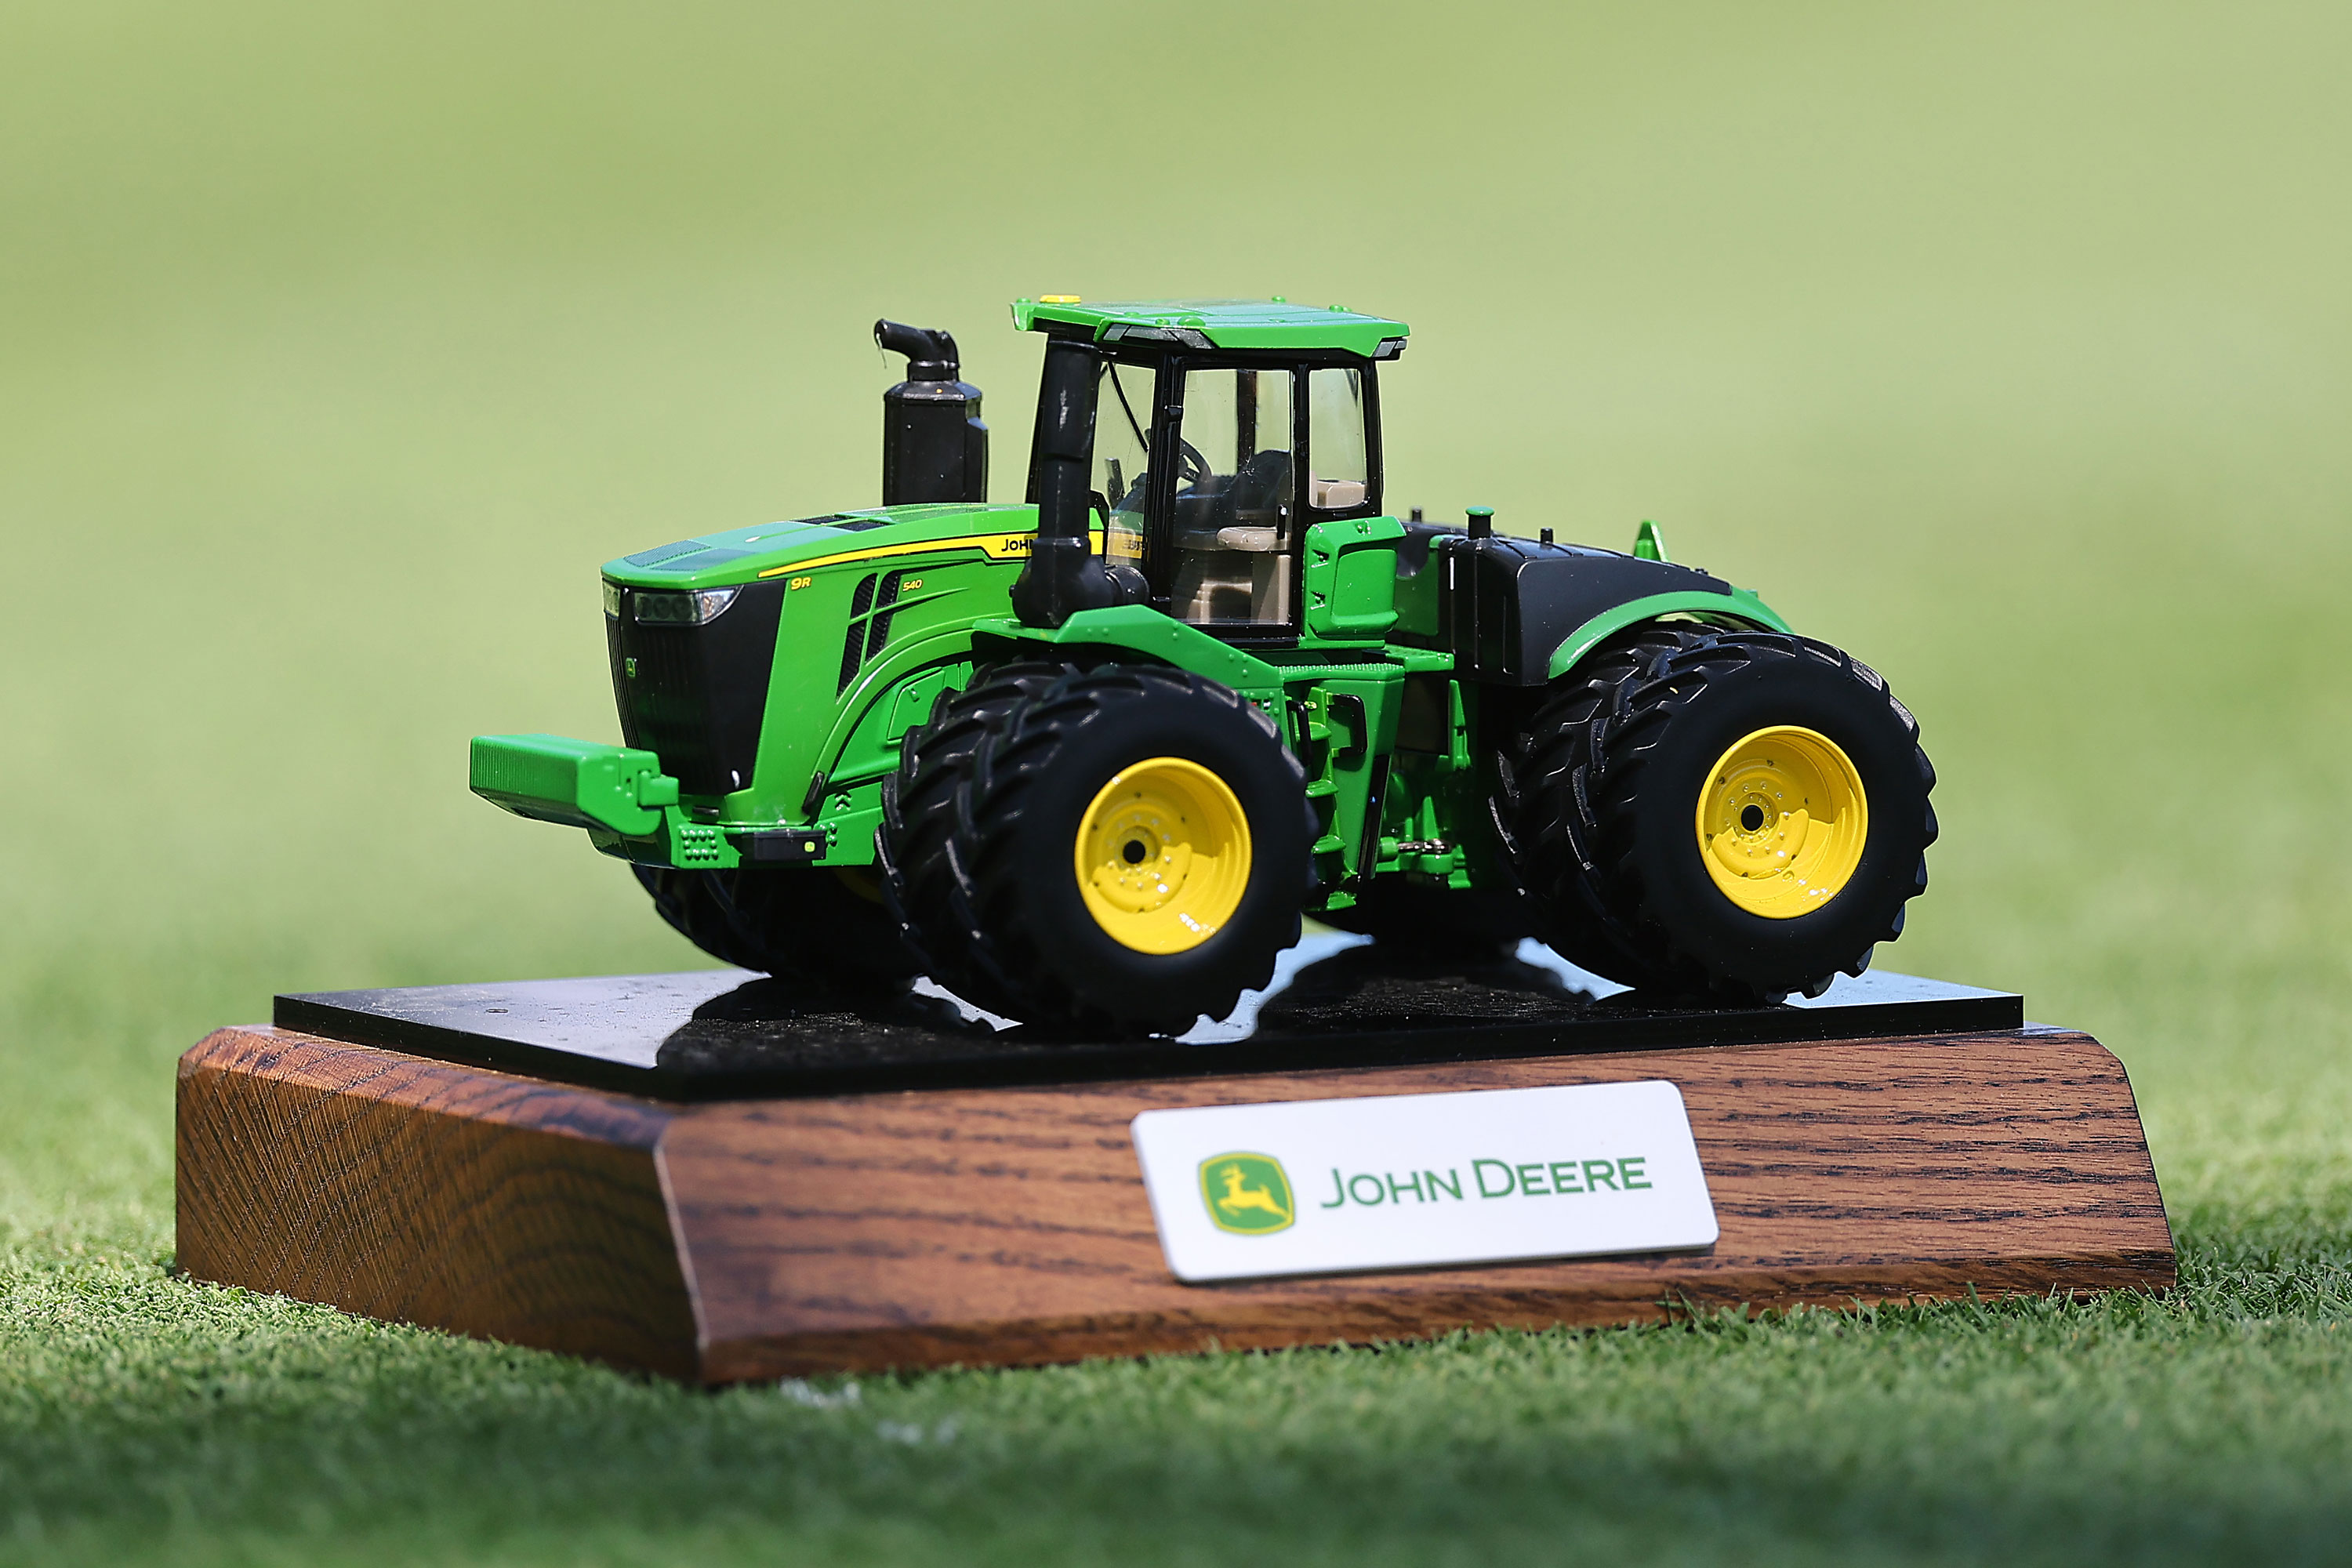 Here's the prize money payout for each golfer at the 2023 John Deere